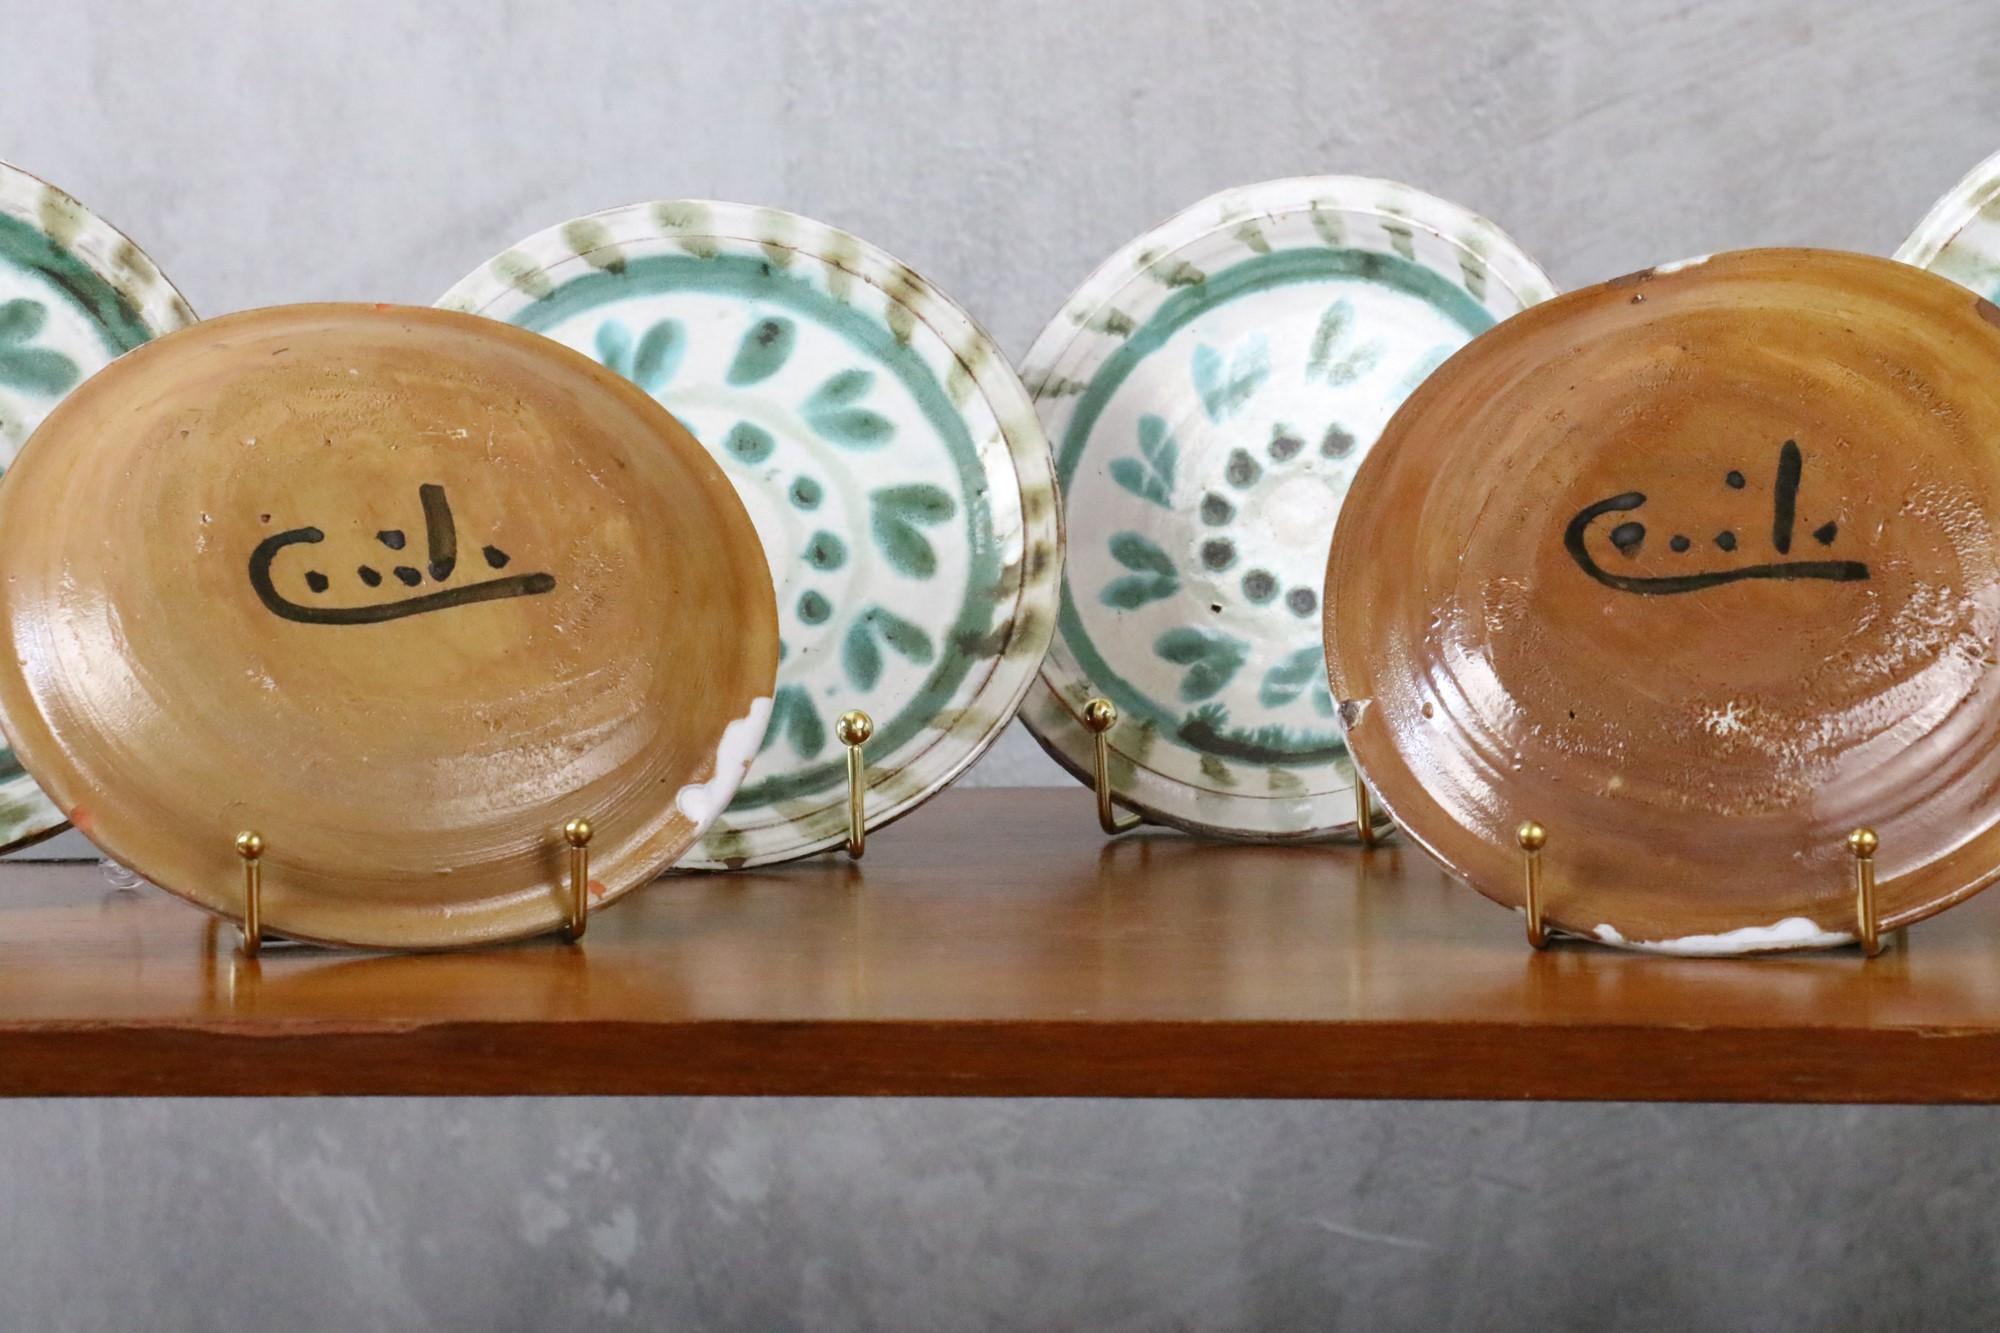 Set of six enamelled plates by Cécile Dein, French ceramist. Circa 1960. 
Decorative plates, they are signed on the bottom. Handmade, they are not perfectly flat. They have a few small chips but are in good condition. 

Born in 1929, Cécile Dein